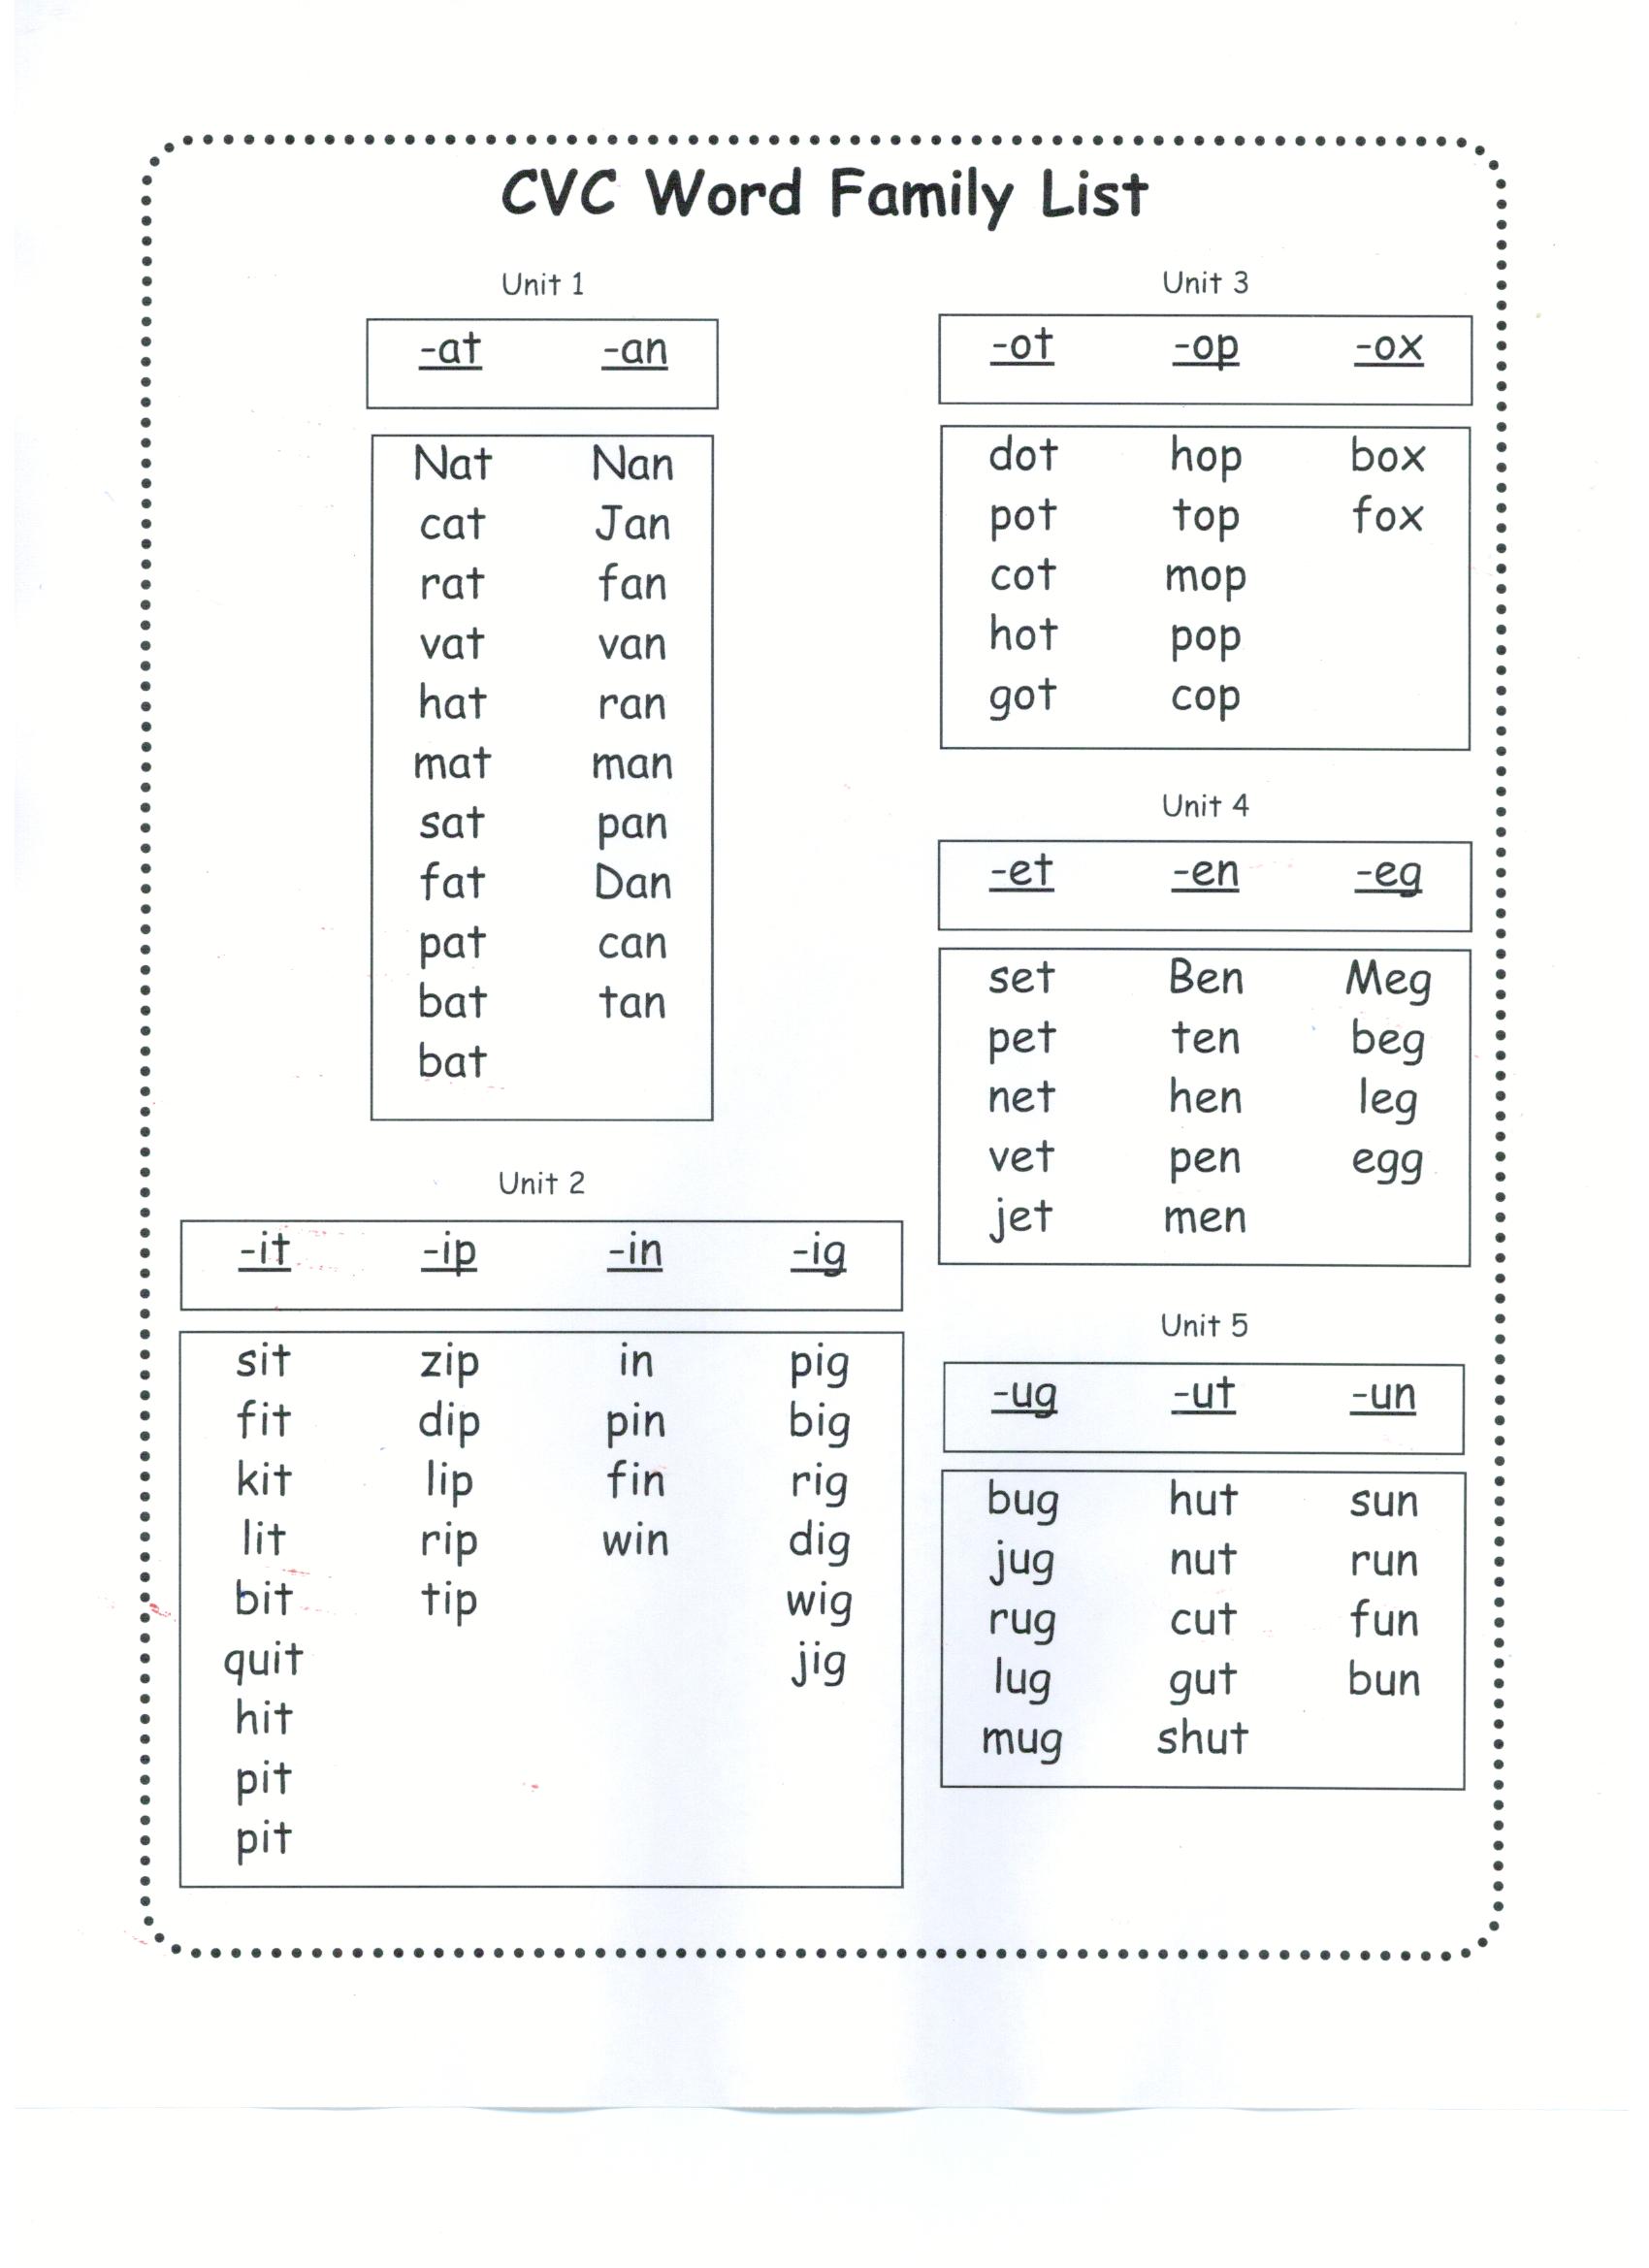 Cvc word family Flashcards For Learning